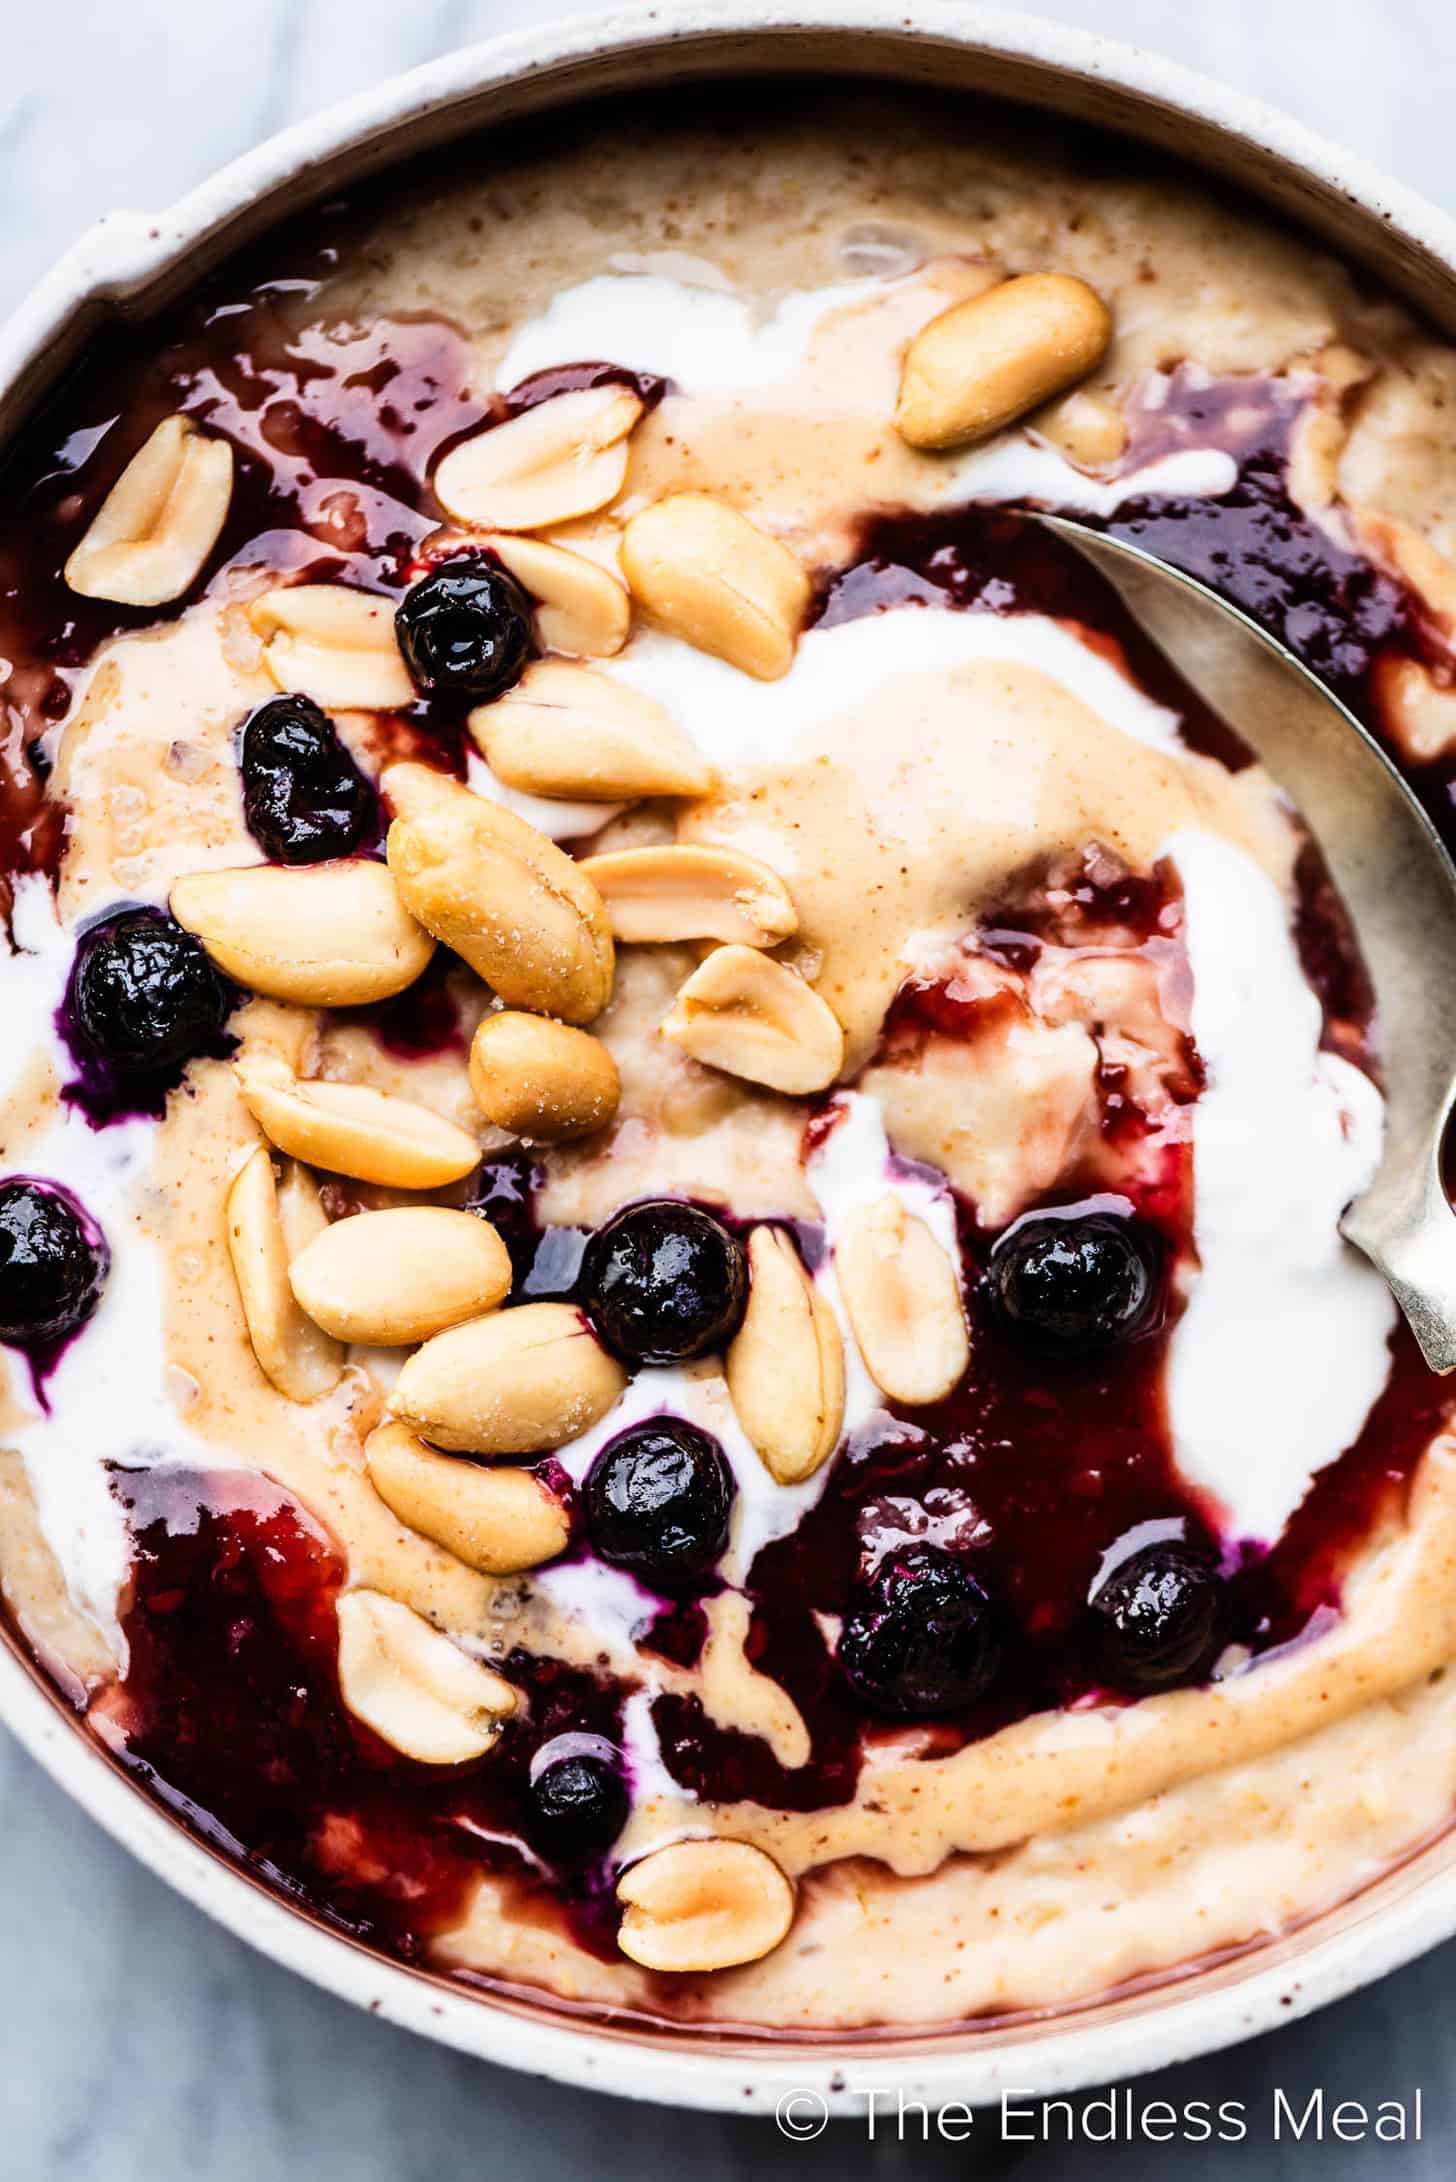 a close up of Peanut Butter Oatmeal in a bowl with jam and blueberries